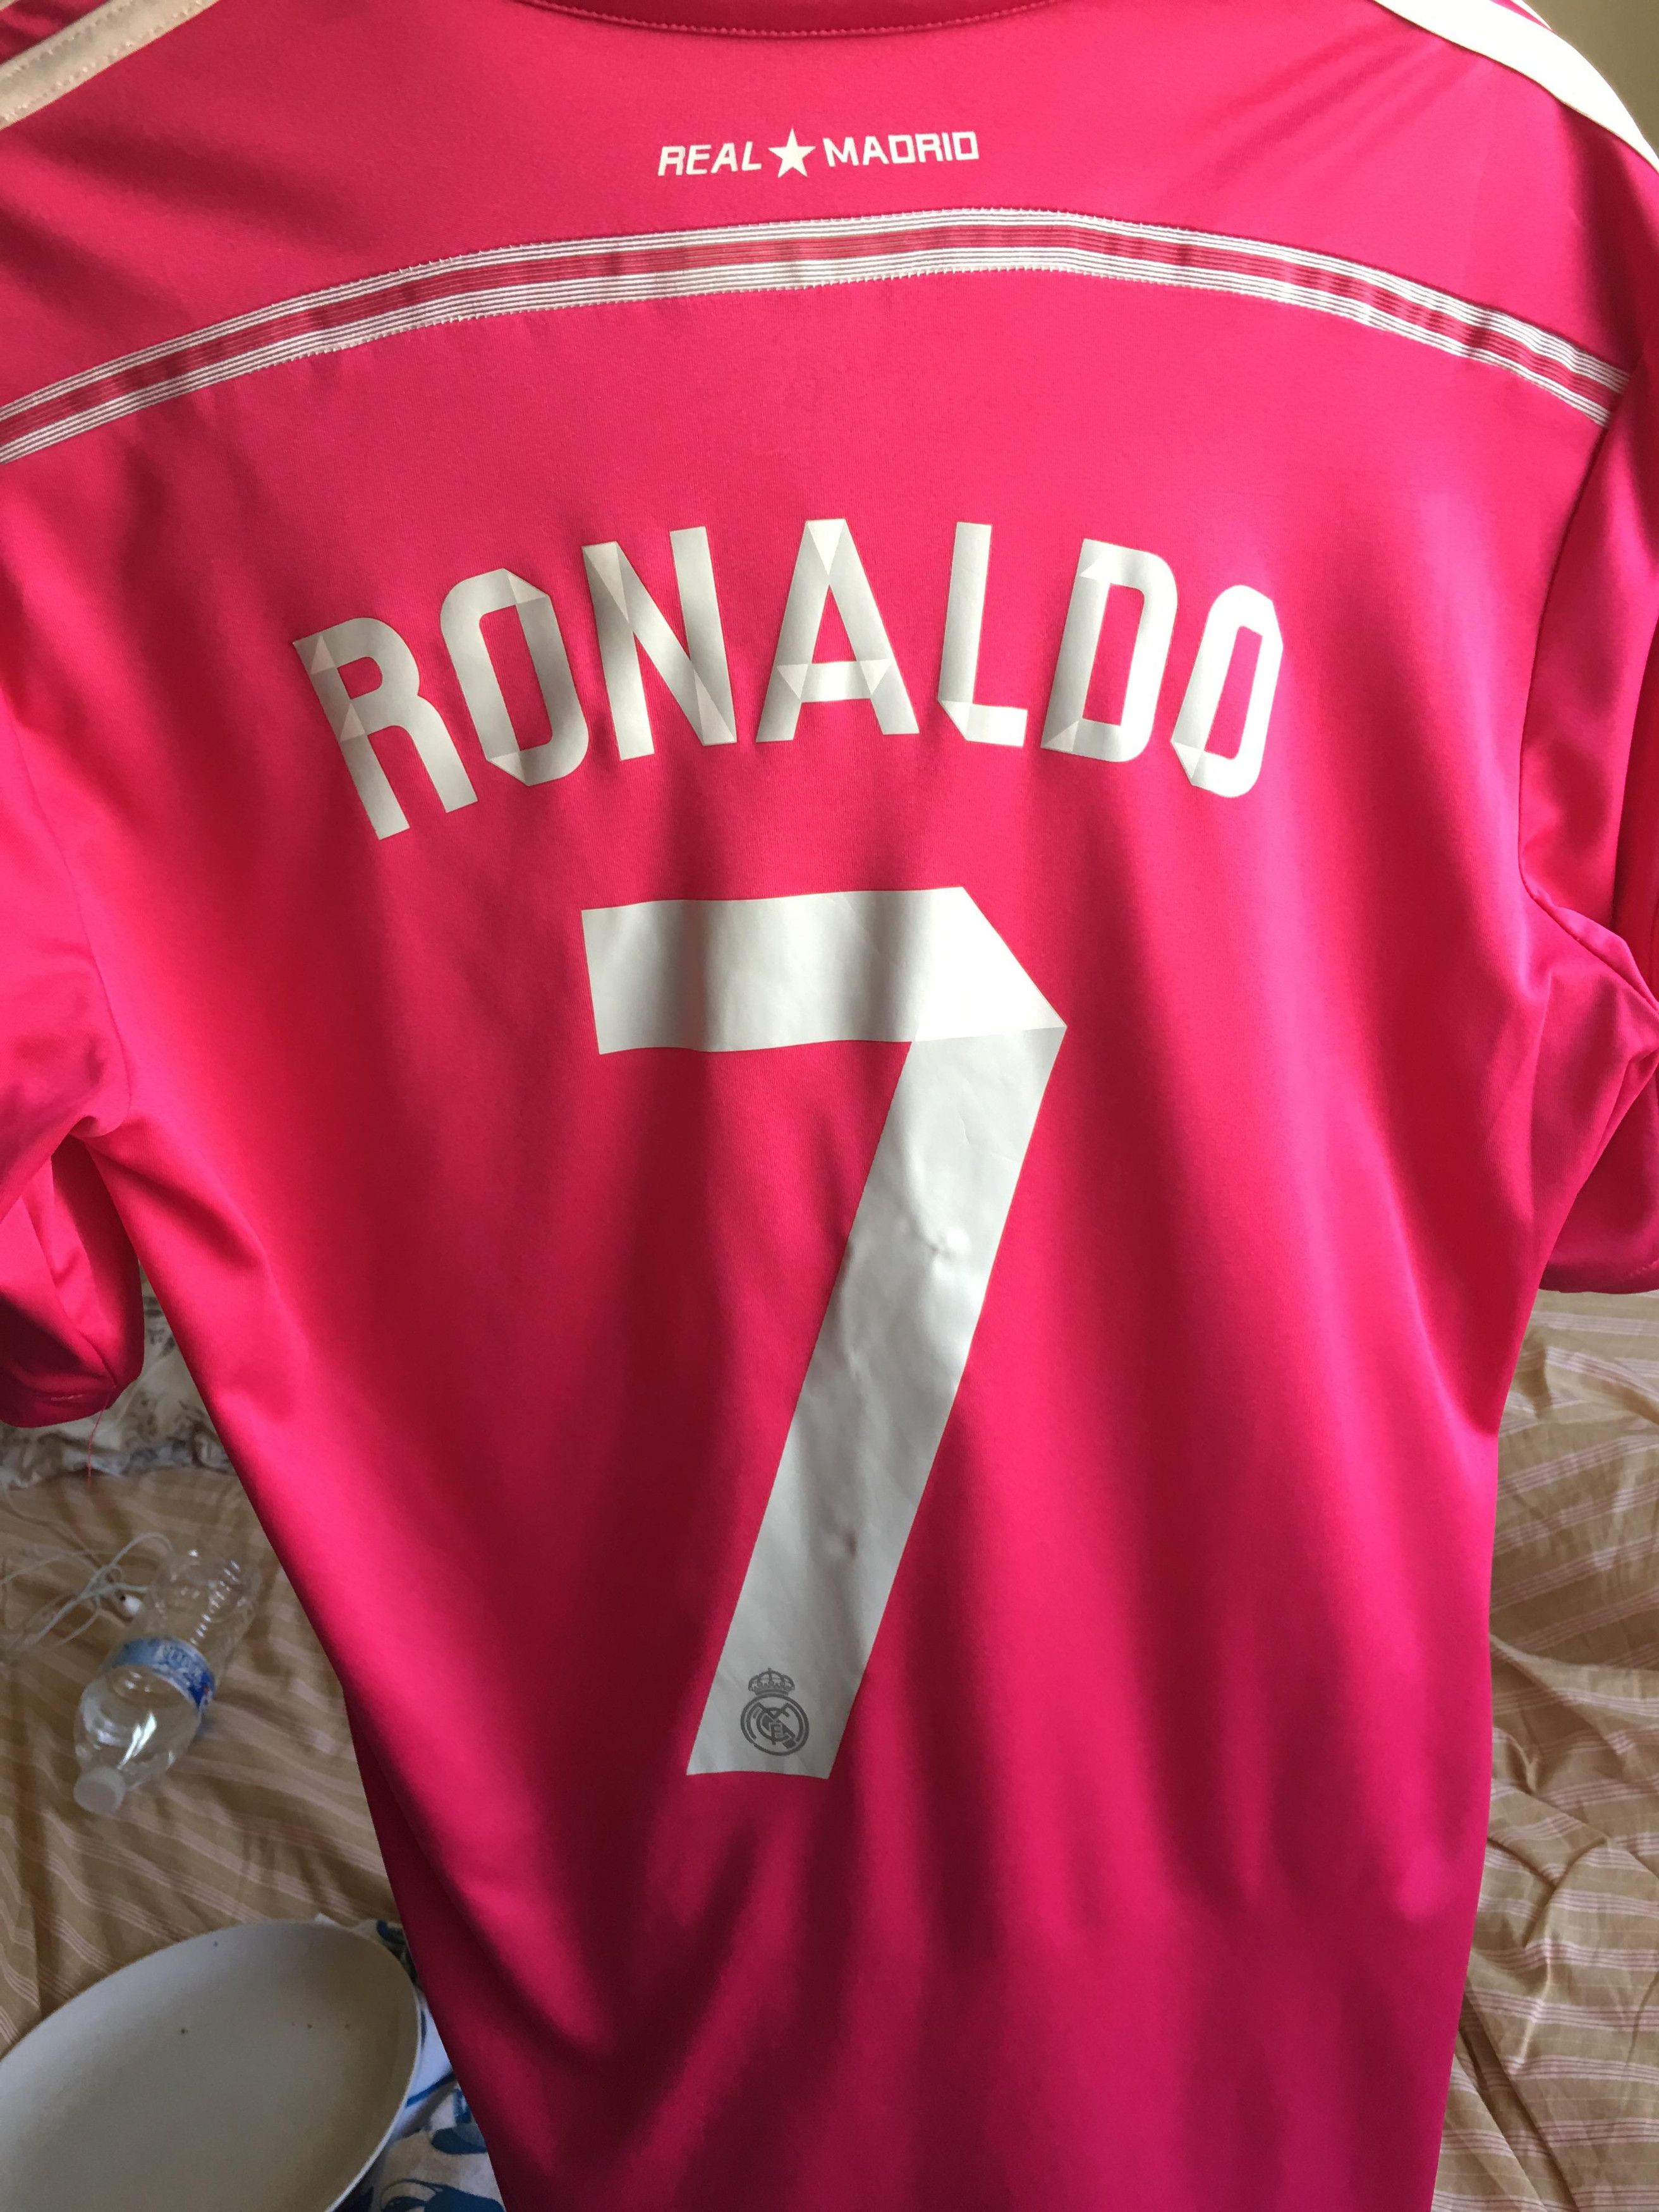 Adidas Pink Real Madrid kit Size US M / EU 48-50 / 2 - 2 Preview